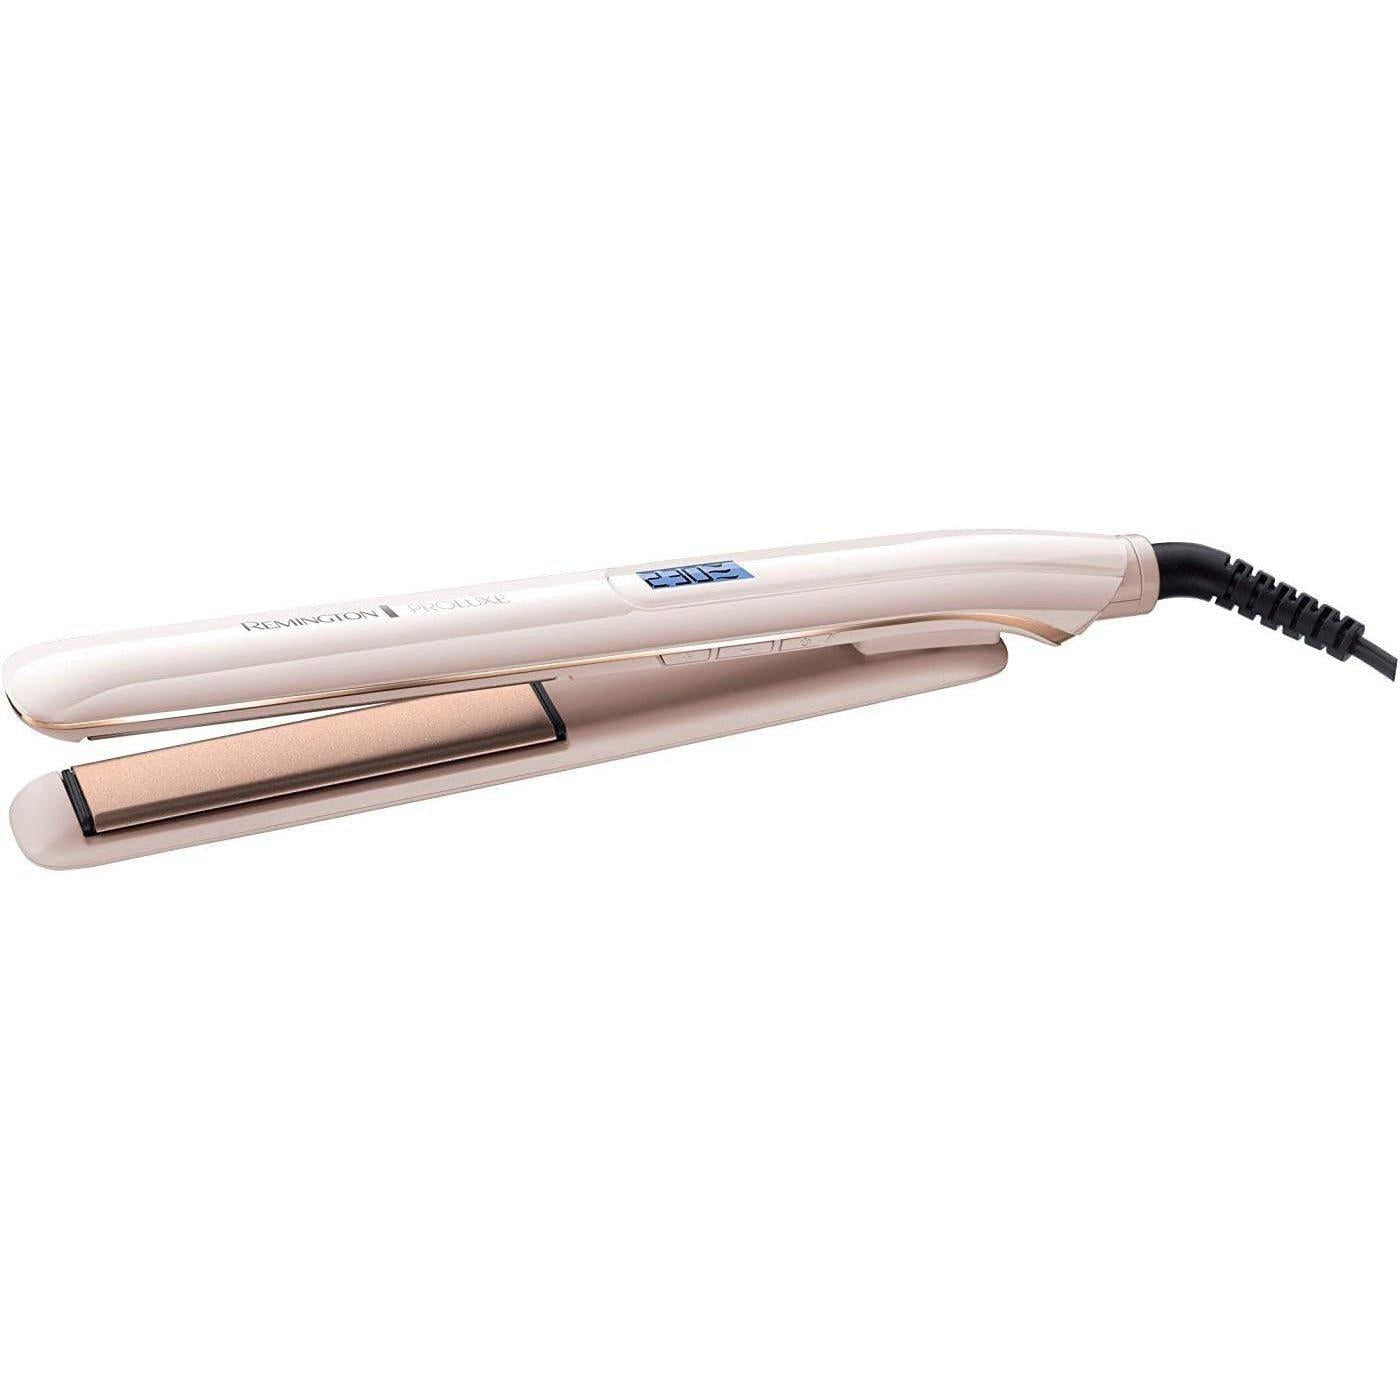 Remington Proluxe Ceramic Hair Straighteners with Pro+ Low Temperature Protective Setting, Rose Gold - S9100 - Healthxpress.ie